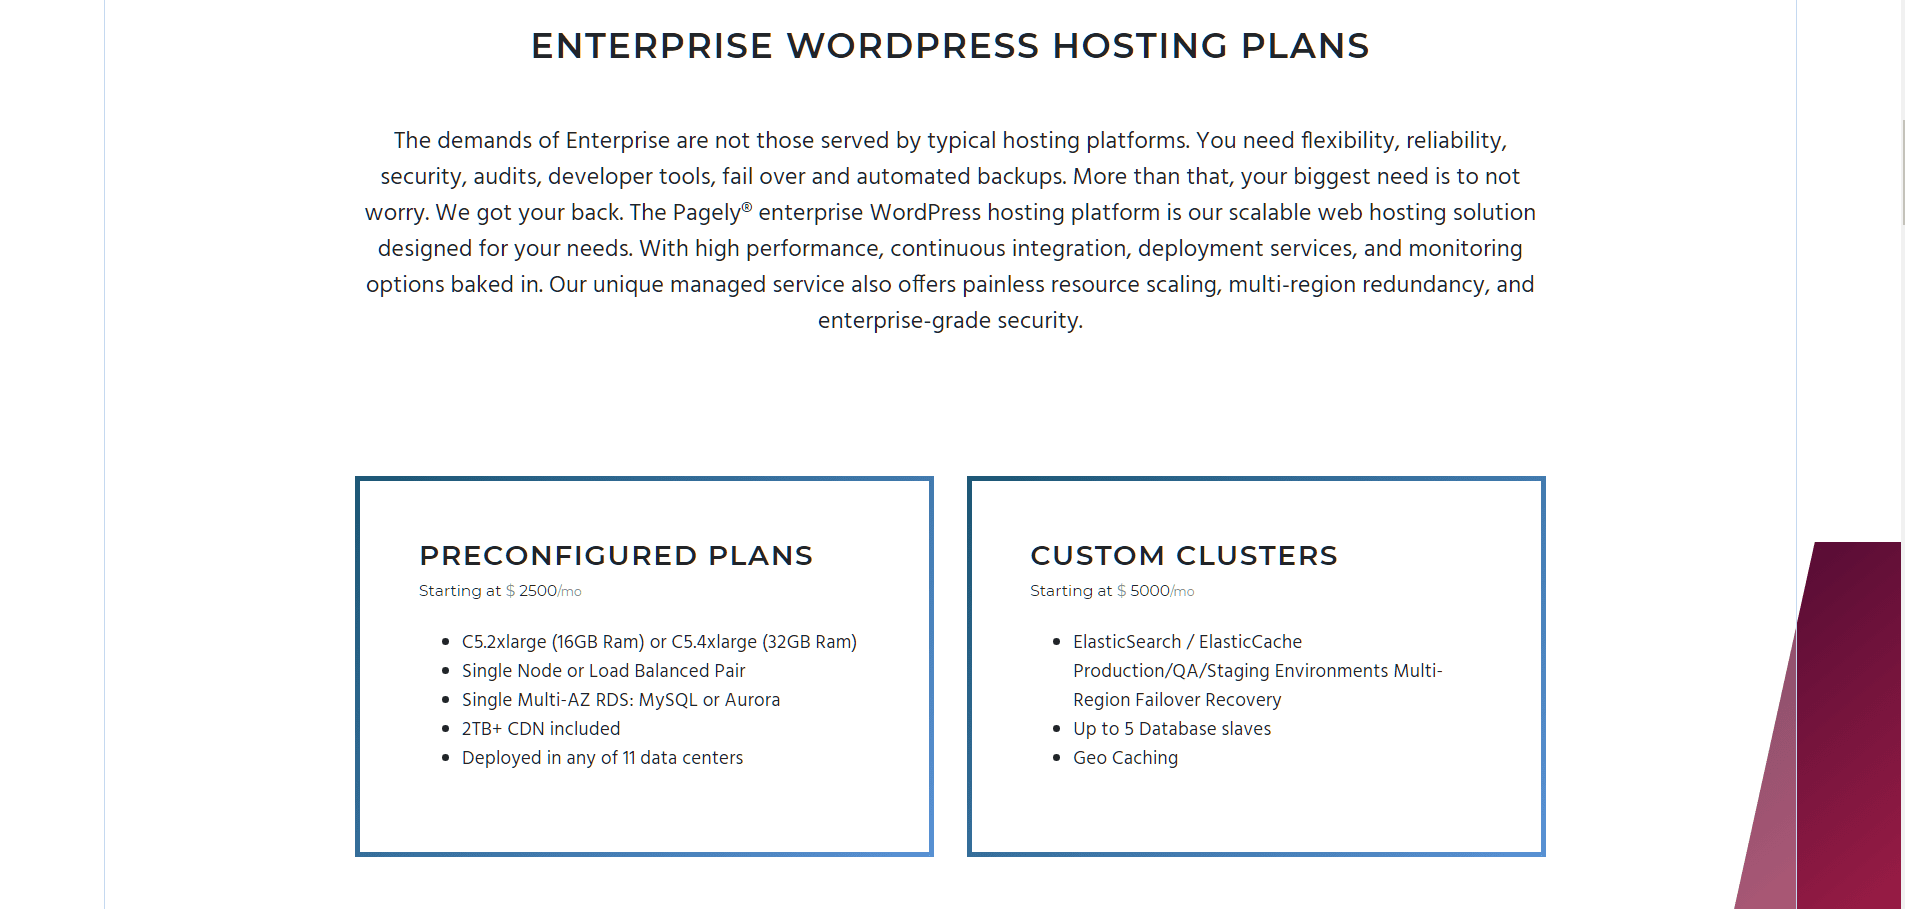 Pagely Review - WordPress Hosting Plans Enterprise